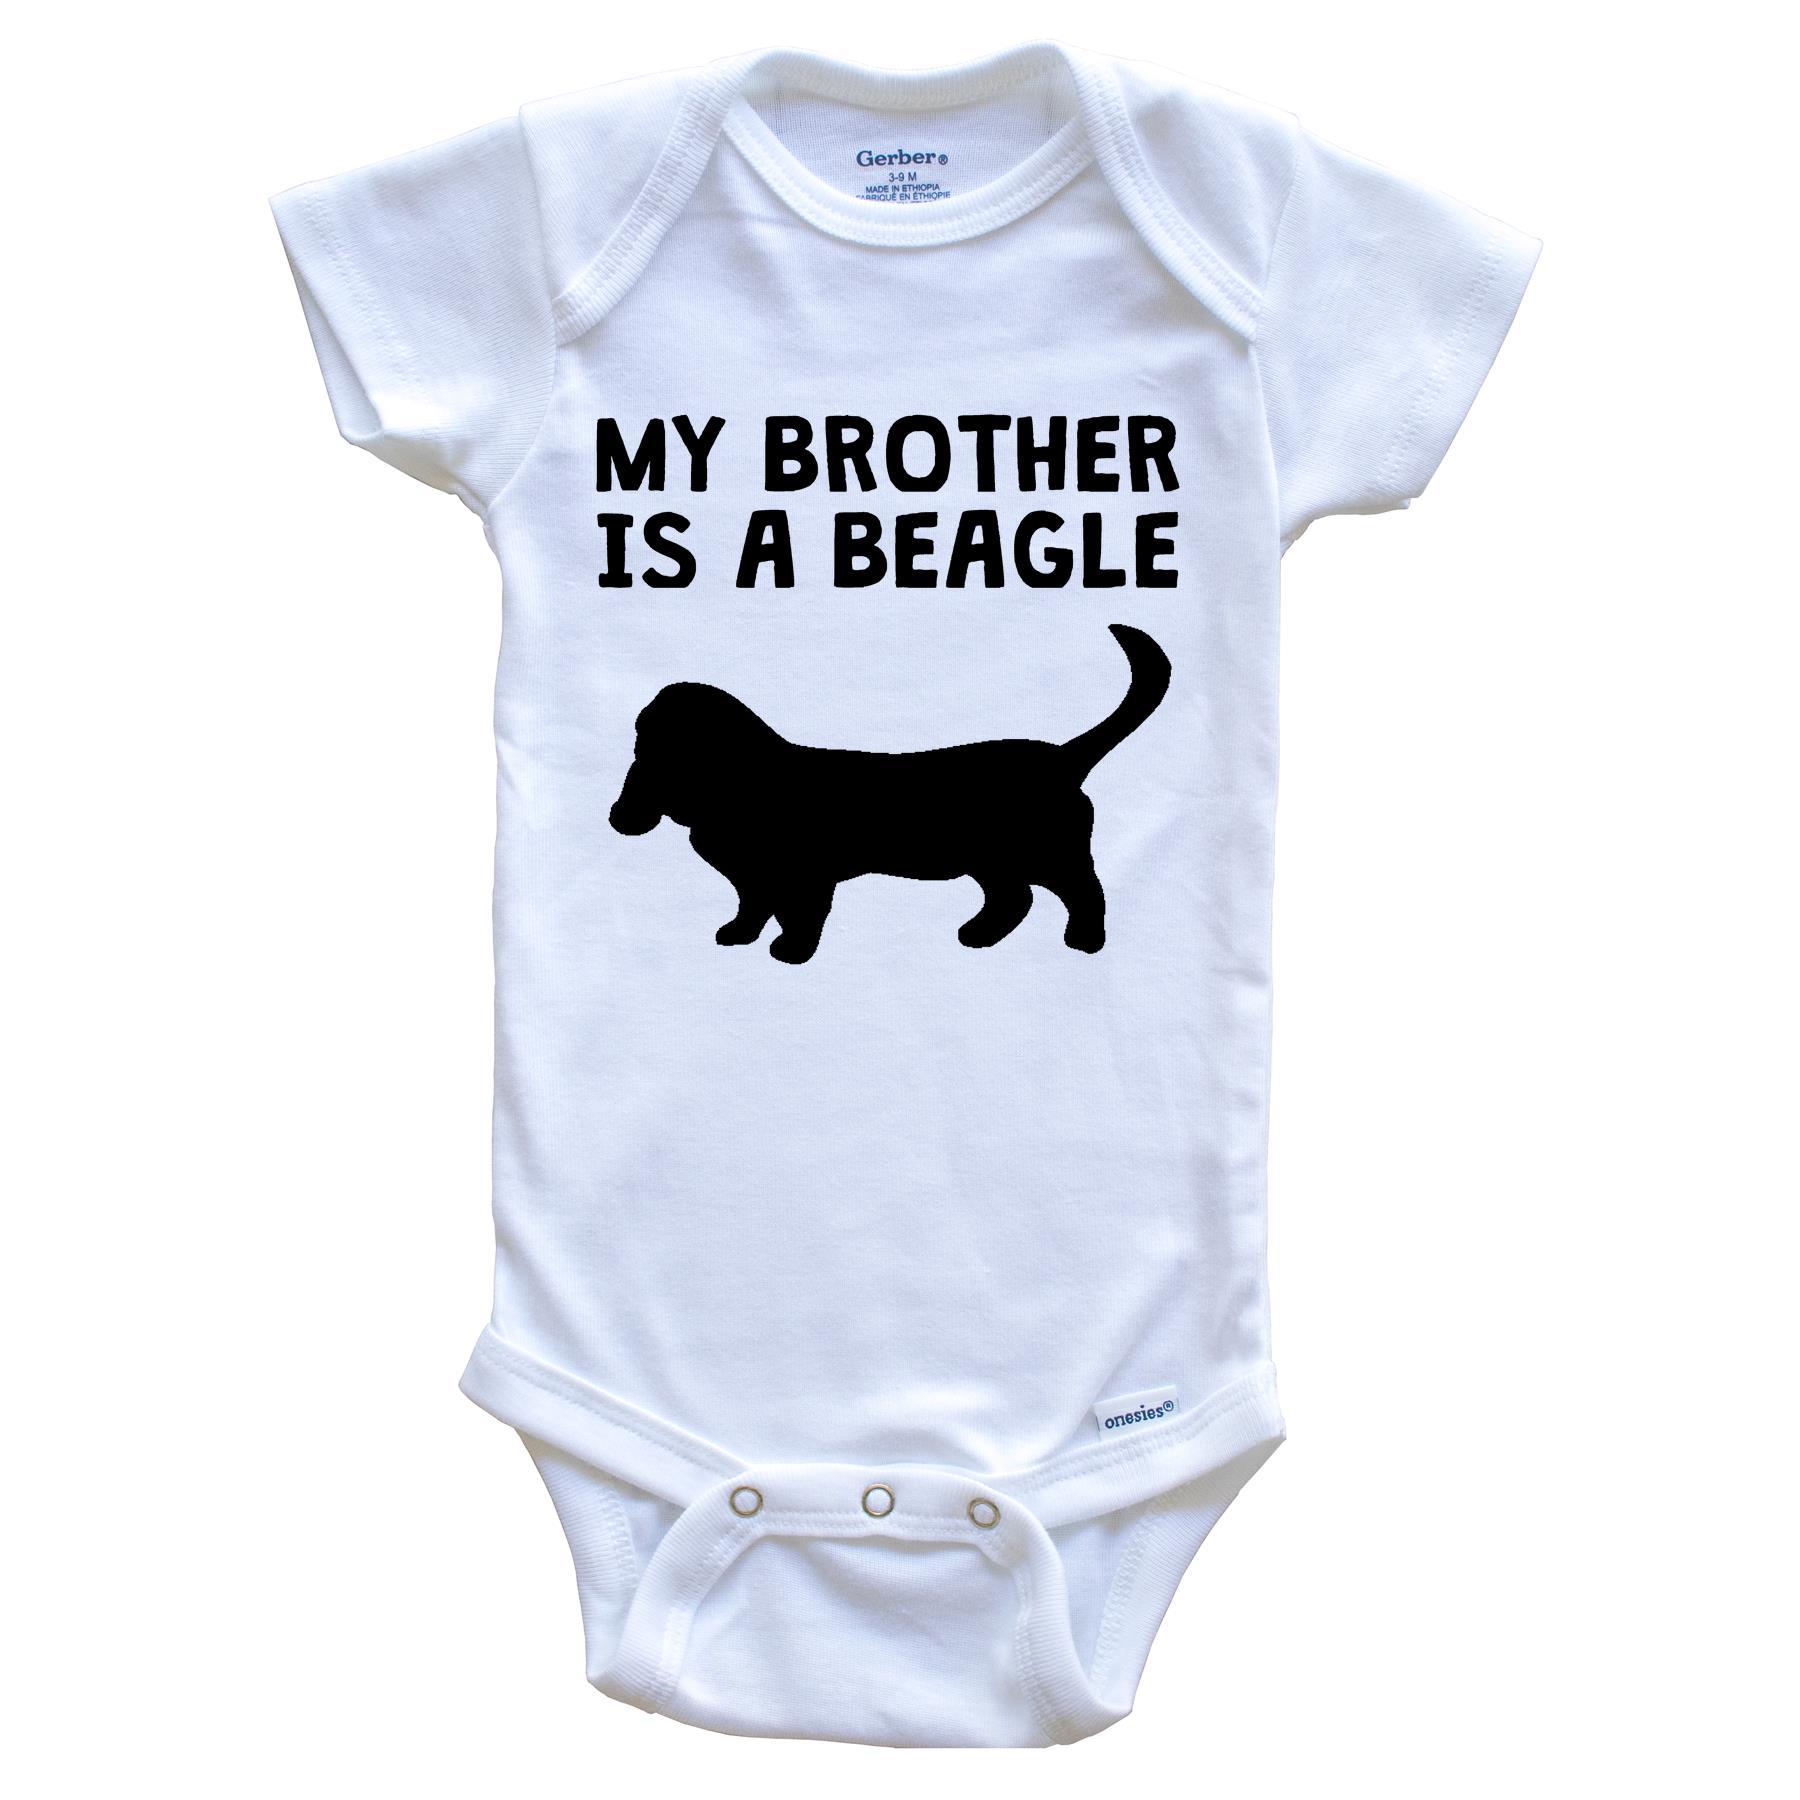 My Brother Is A Beagle Baby Onesie